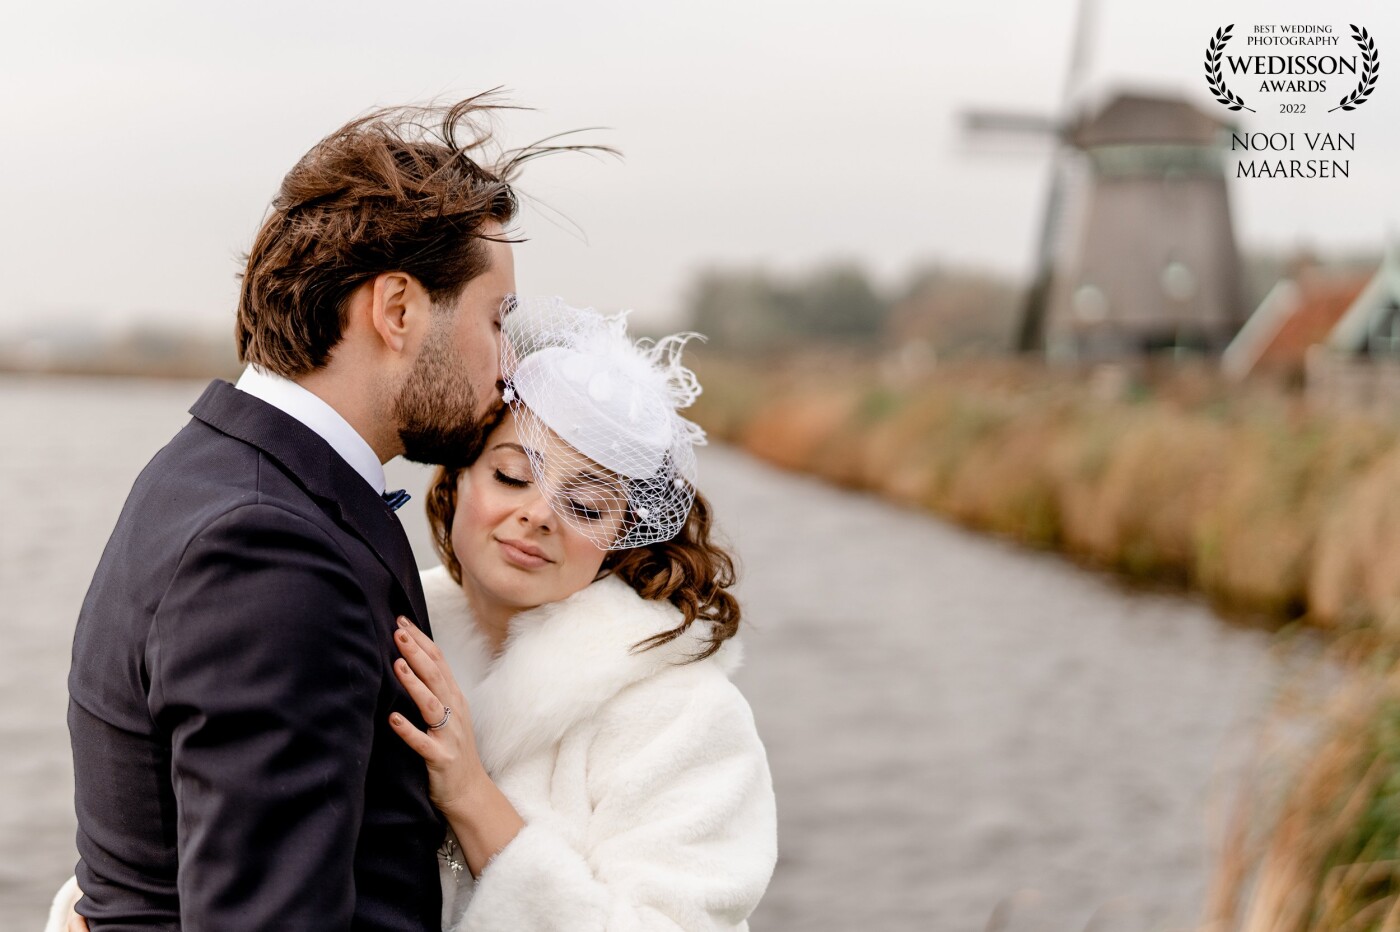 After getting married in the city hall in Landsmeer Alperen and Fagria took me to their special place called het Twiske, this is an extraordinary nature reserve in The Netherlands. We walked for about 30 minutes to get to the spot with this windmill and it was absolutely worth it. It gave me a sereen feeling, the beautiful couple, water clashing, the wind blowing and the stunning views of nature.